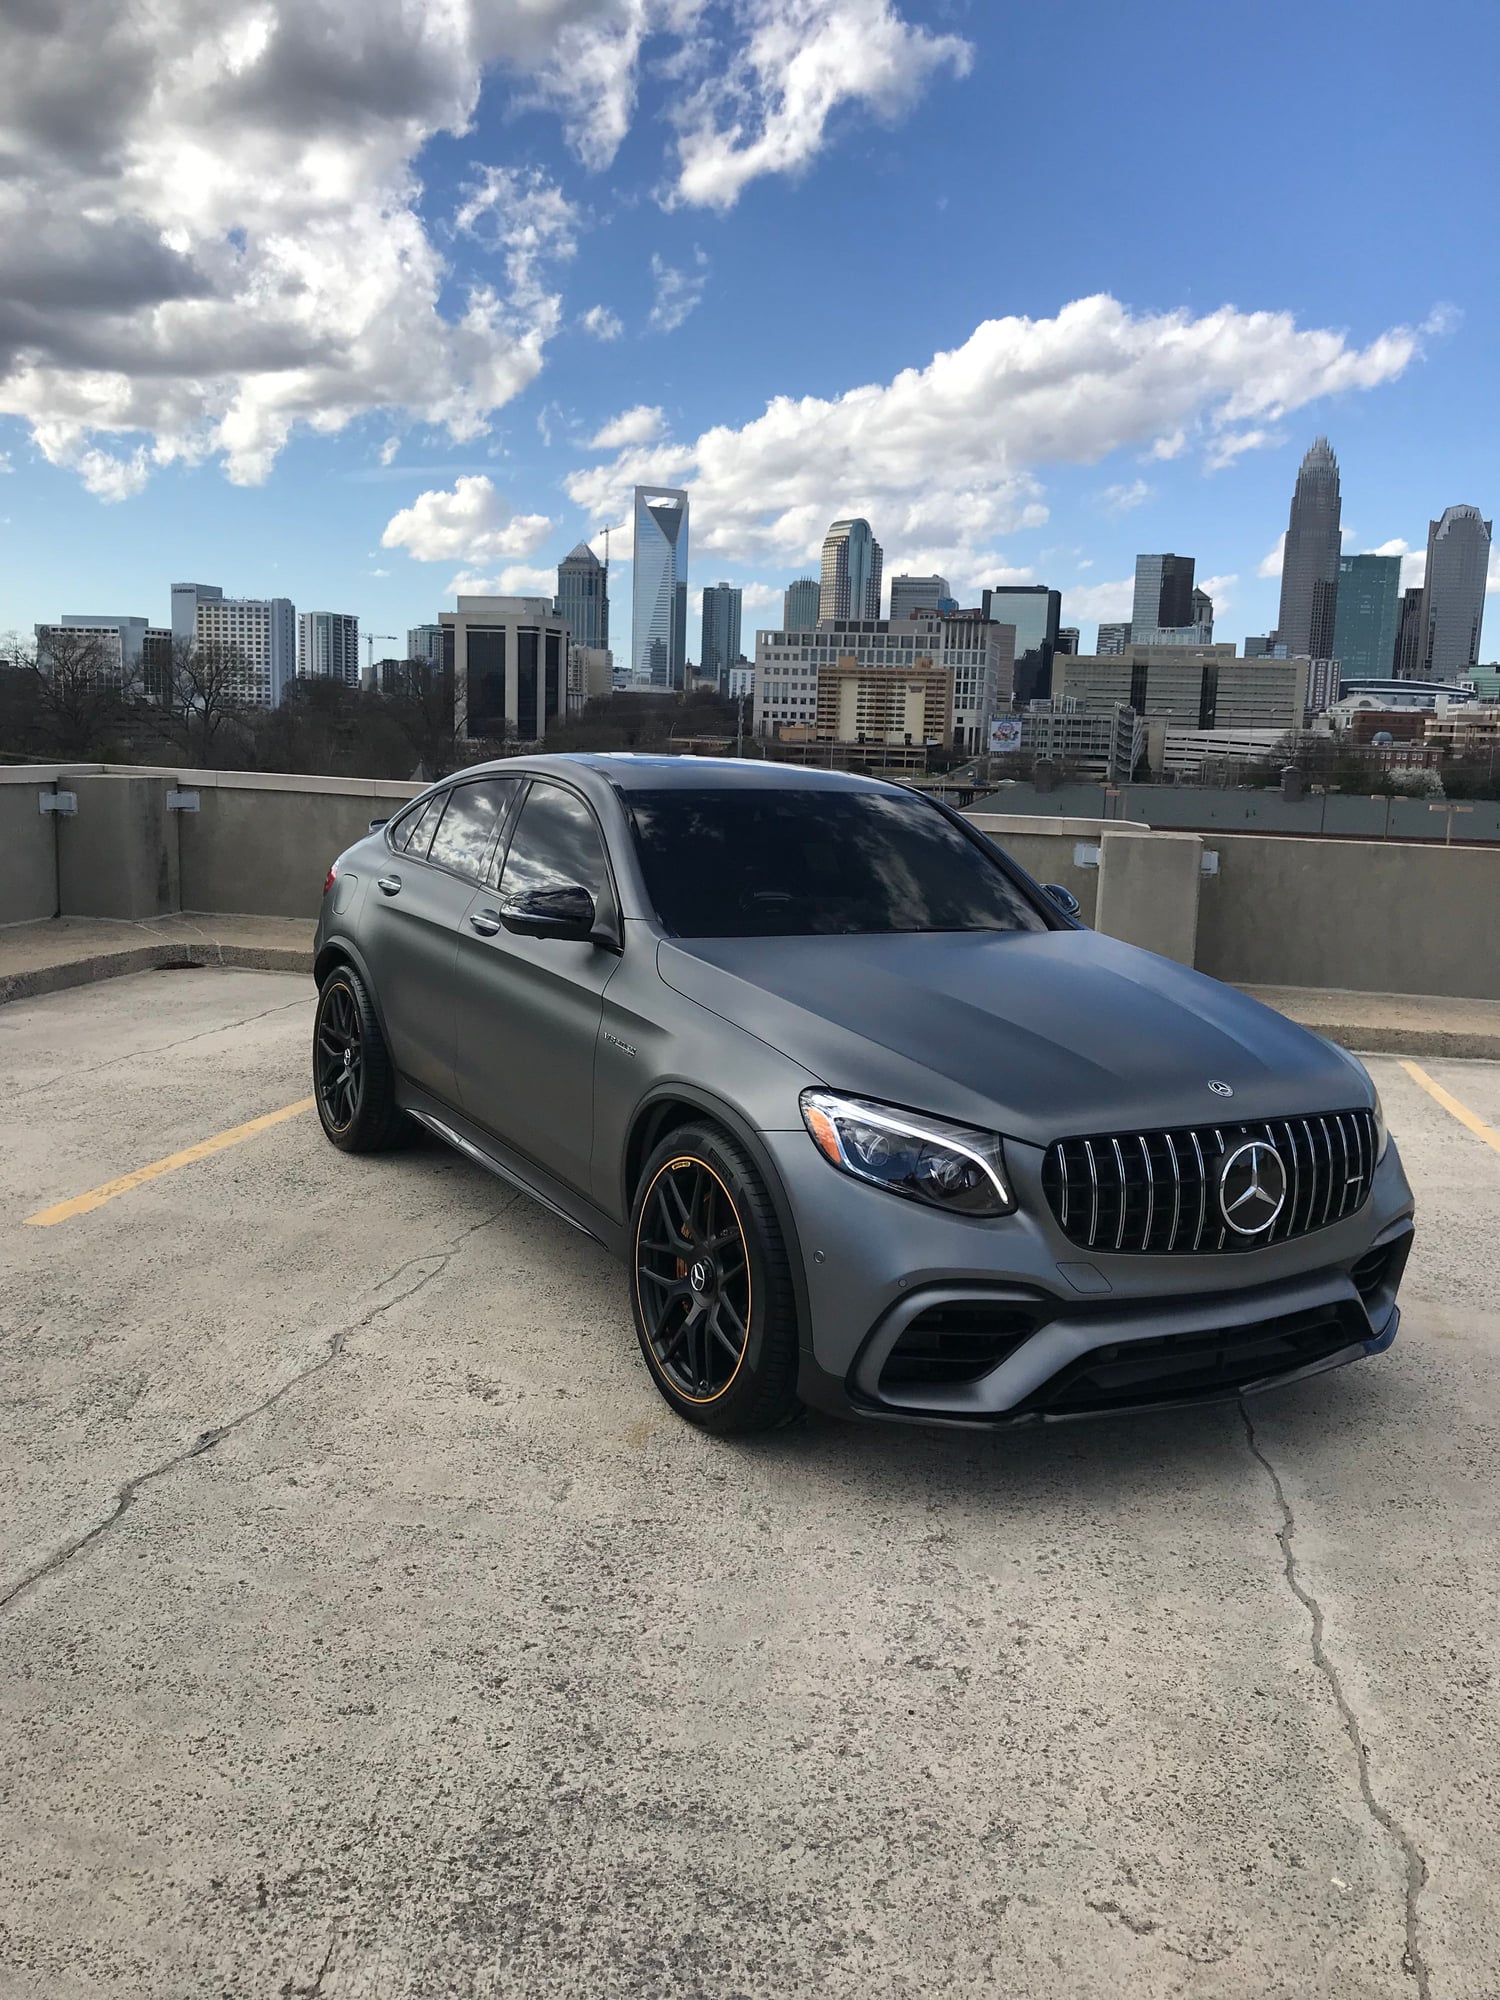 2018 Mercedes-Benz GLC63 AMG S - 2018 Mercedes-Benz AMG GLC 63 S COUPE EDITION 1 Less Than 2,000 Miles Ceramic Pro 9H - Used - VIN WDC0J8KB2JF466841 - 1,800 Miles - 8 cyl - AWD - Coupe - Gray - Charlotte, NC 28202, United States